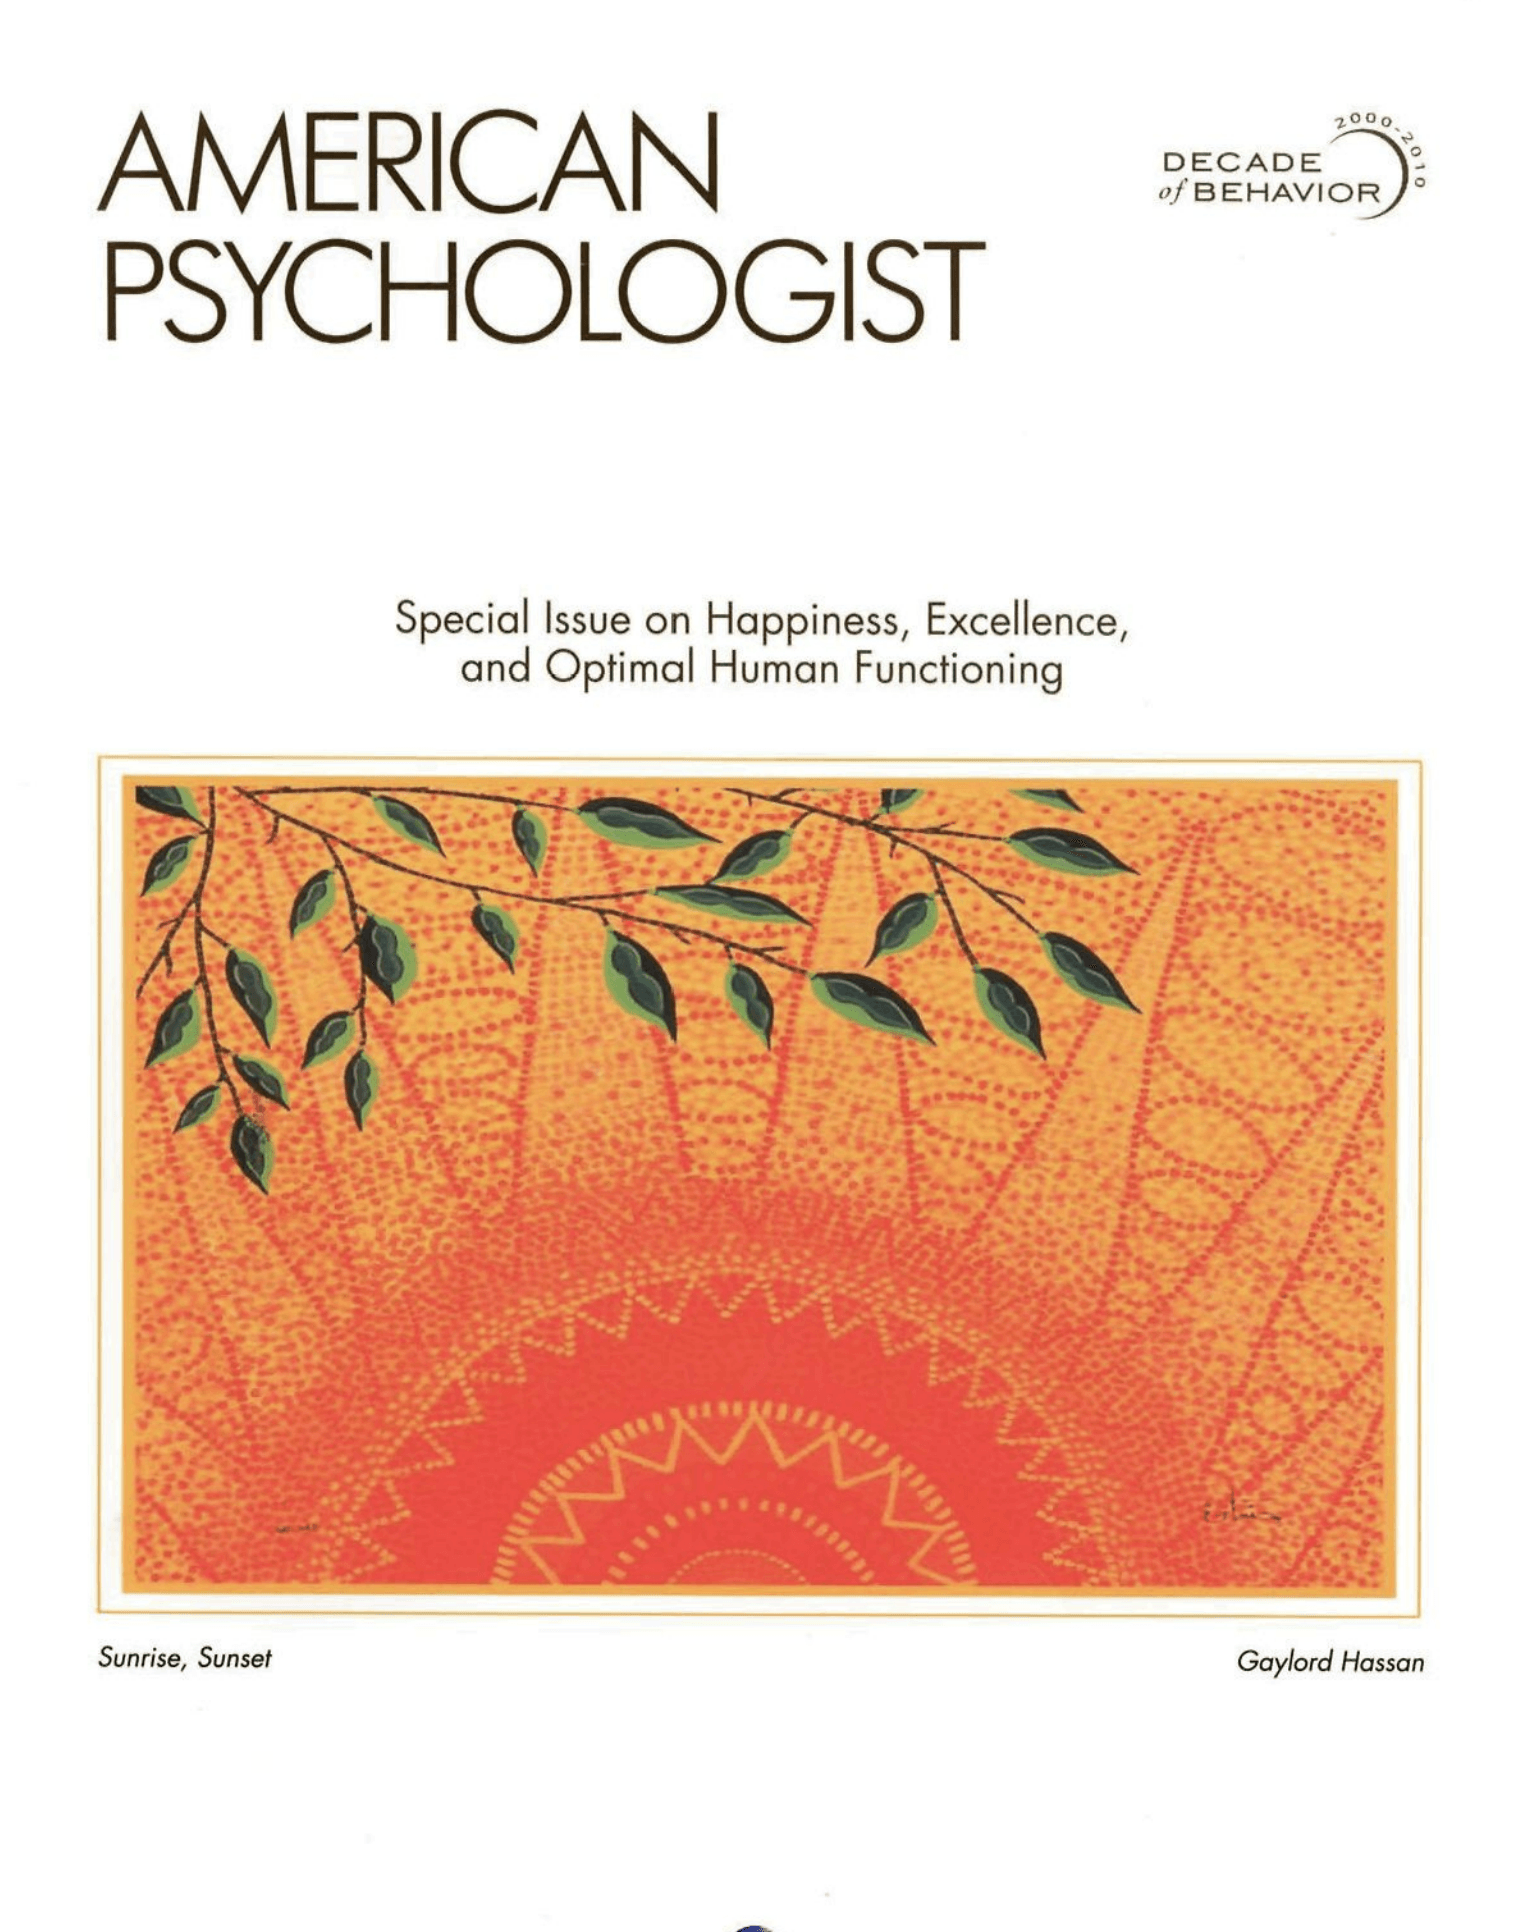 Image of American Psychologist Cover